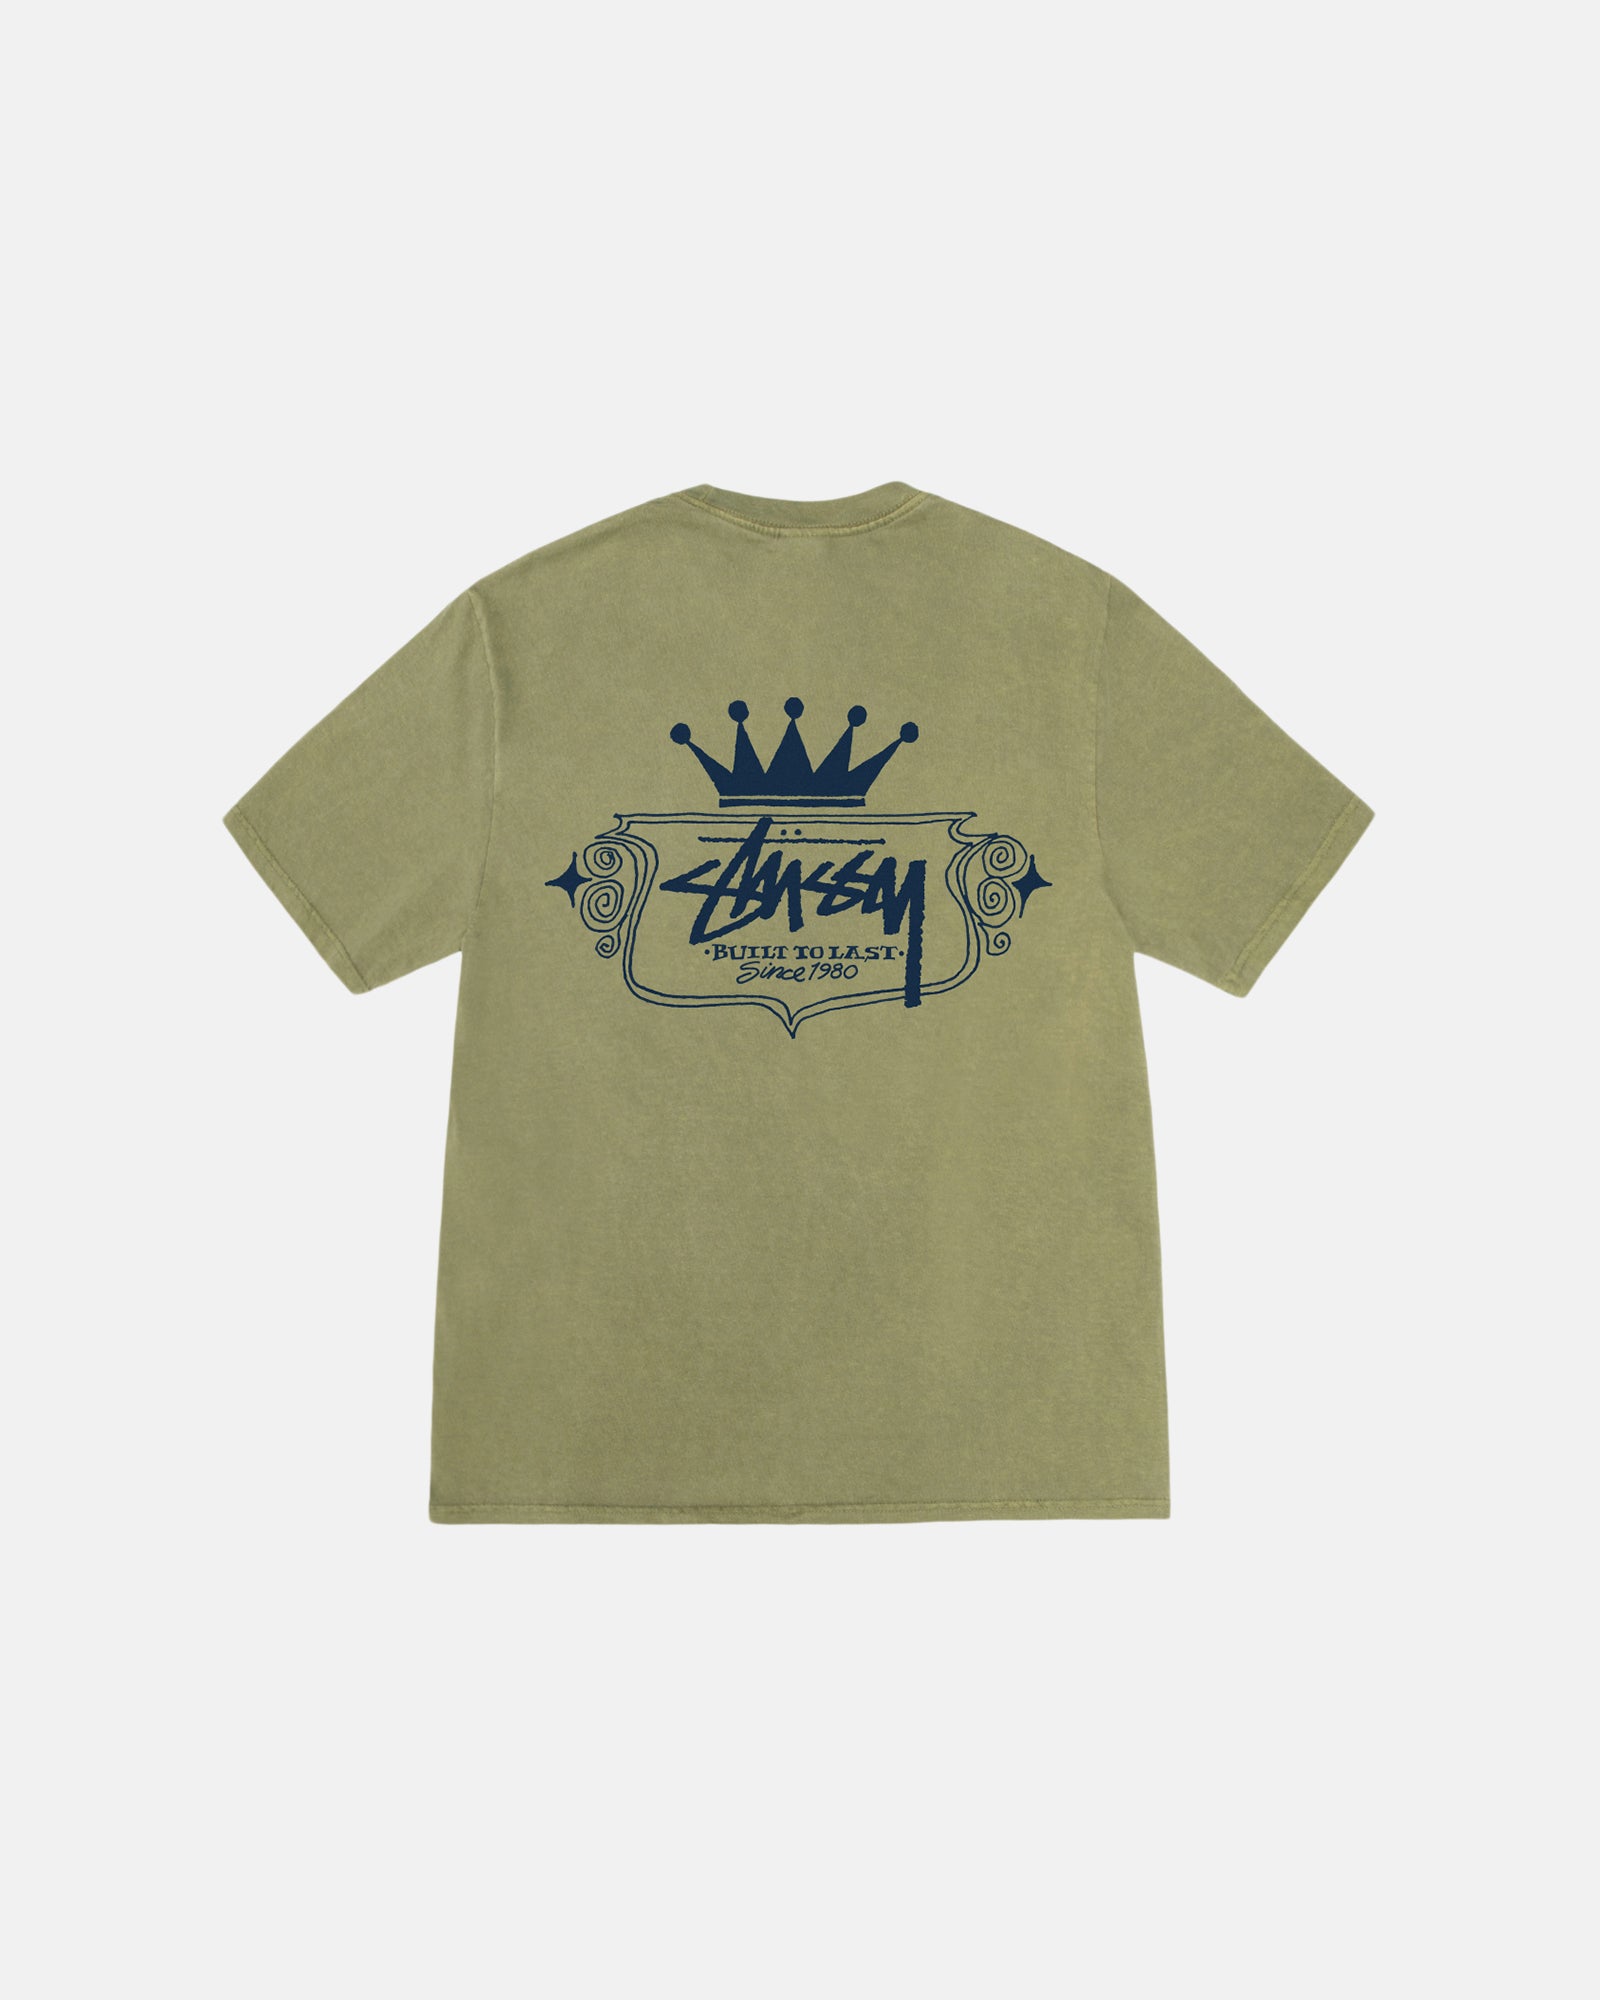 STÜSSY BUILT TO LAST TEE PIGMENT DYED OLIVE SHORTSLEEVE